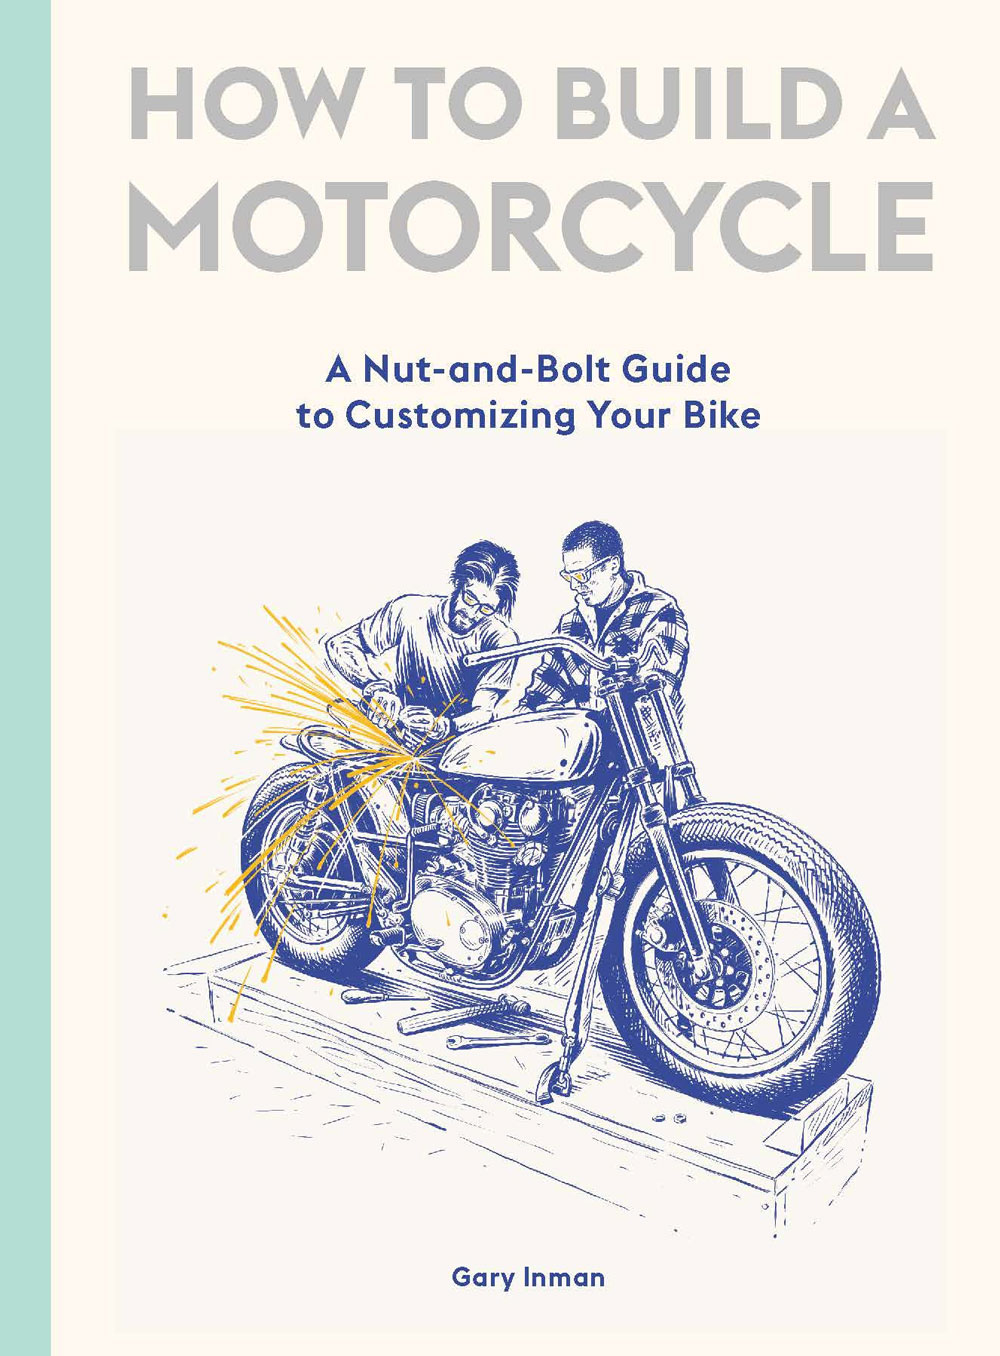 How to Build a Motorcycle - A Nut-and-Bolt Guide to Customizing Your Bike